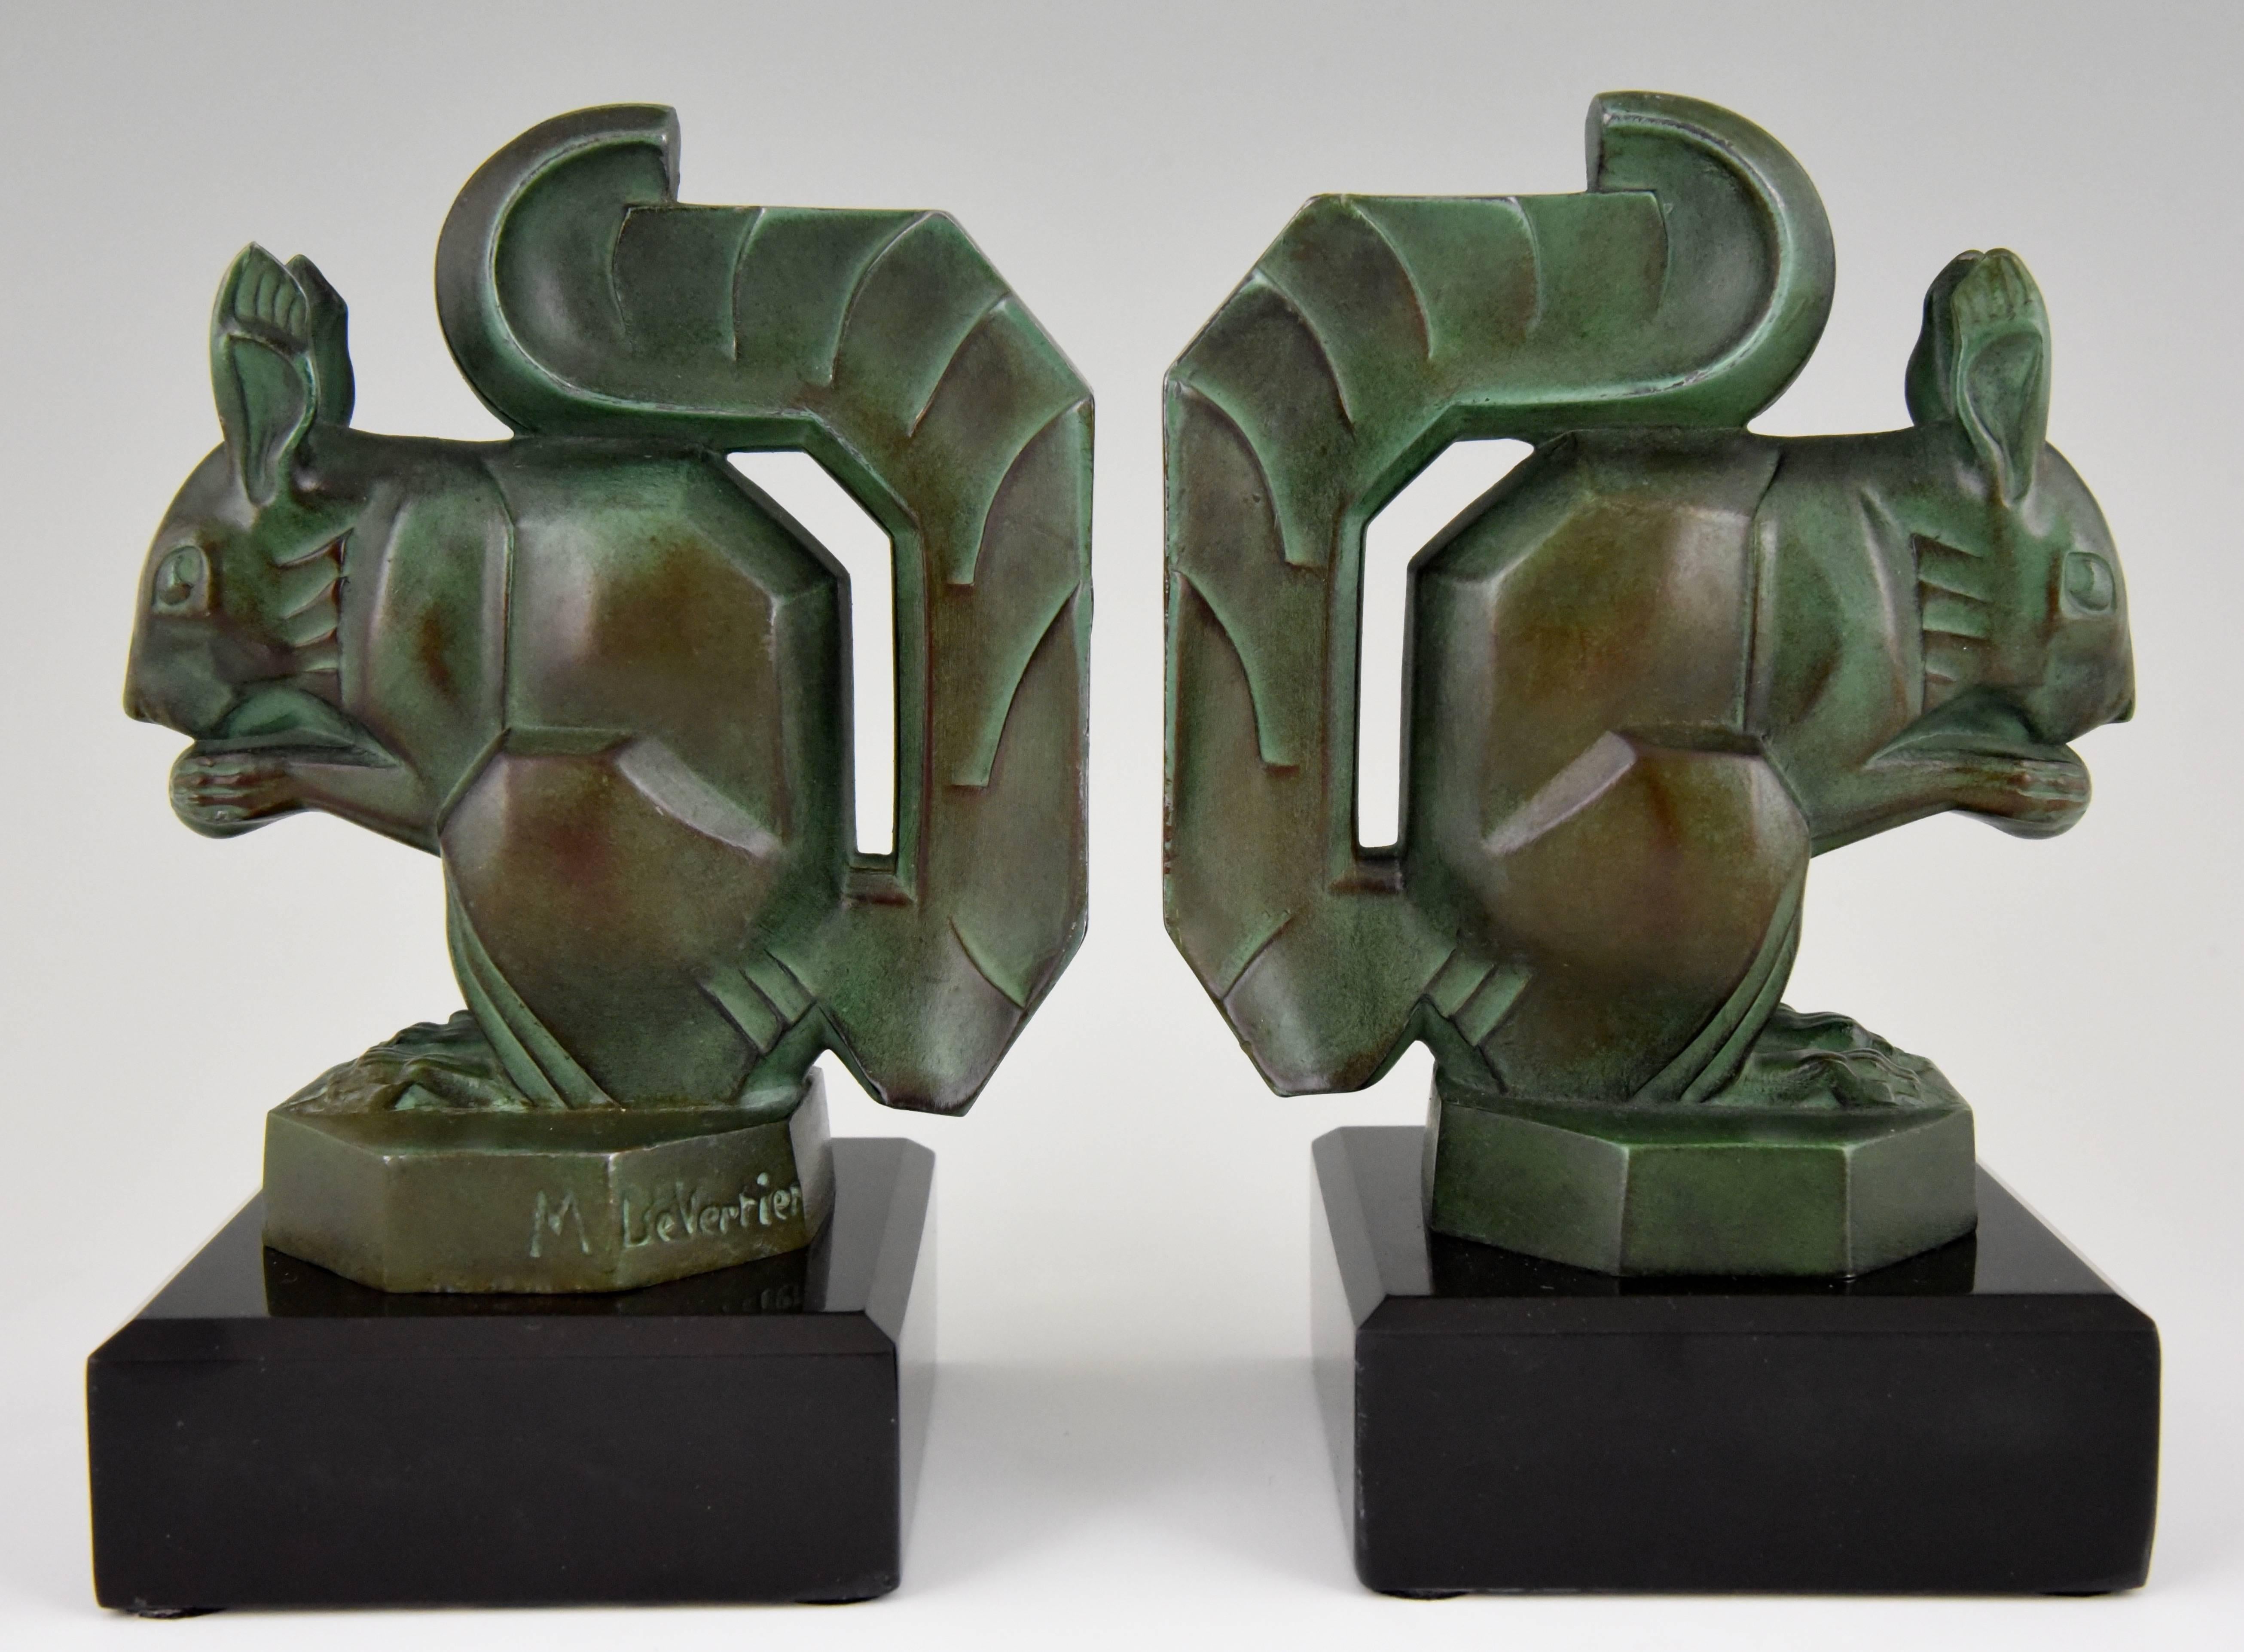 Typical Art Deco bookends with squirrels by the famous French sculptor Max Le Verrier, Art metal with green patina on Belgian black marble base.
Signature / Marks: M. Le Verrier.
Style: Art Deco.
Date: 1930.
Material: Green patinated metal.